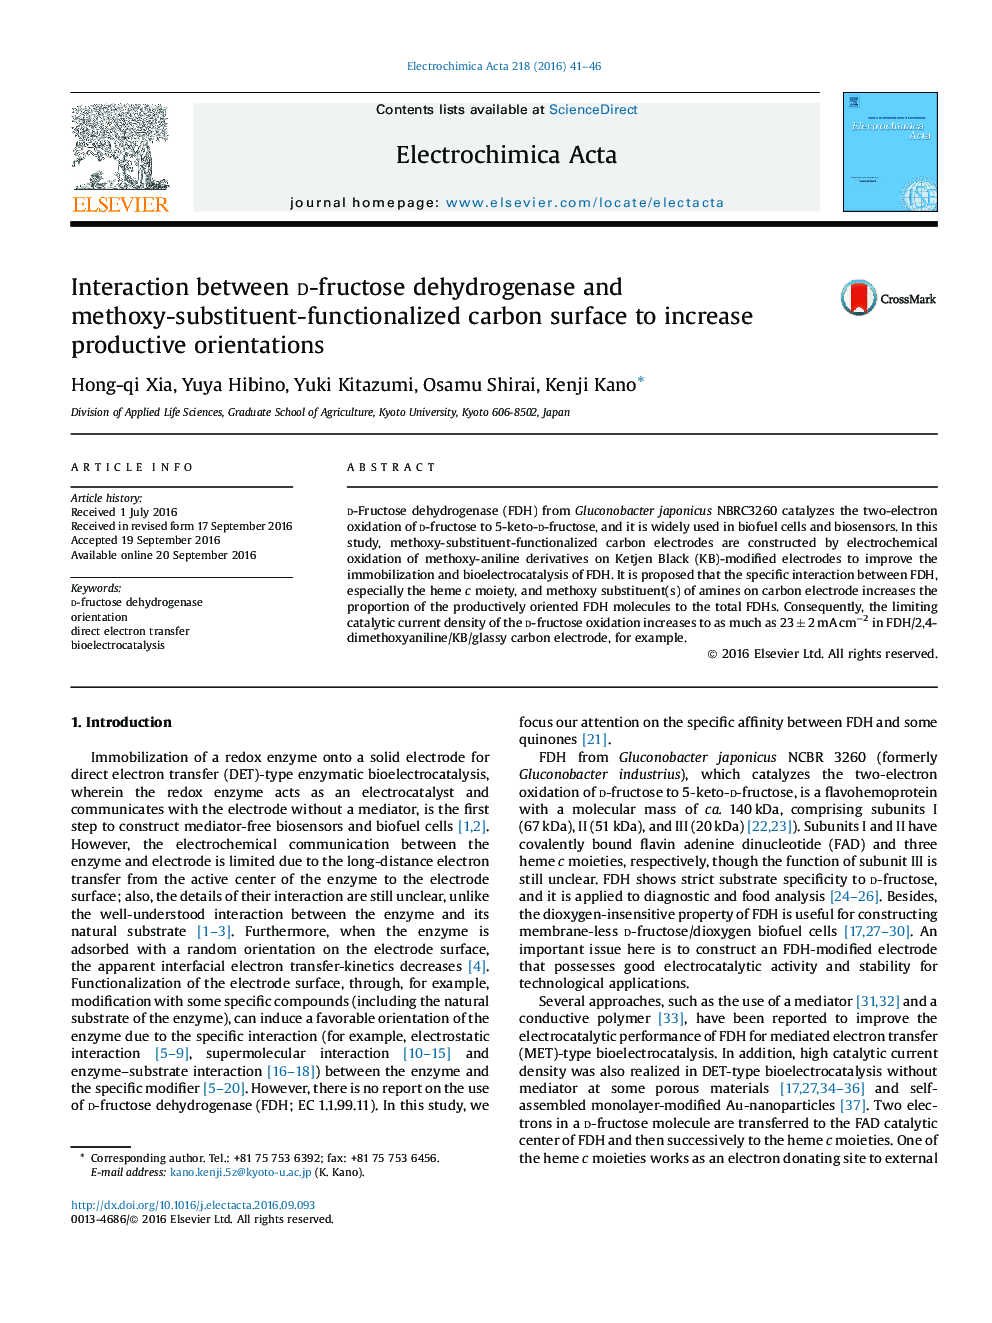 Interaction between d-fructose dehydrogenase and methoxy-substituent-functionalized carbon surface to increase productive orientations